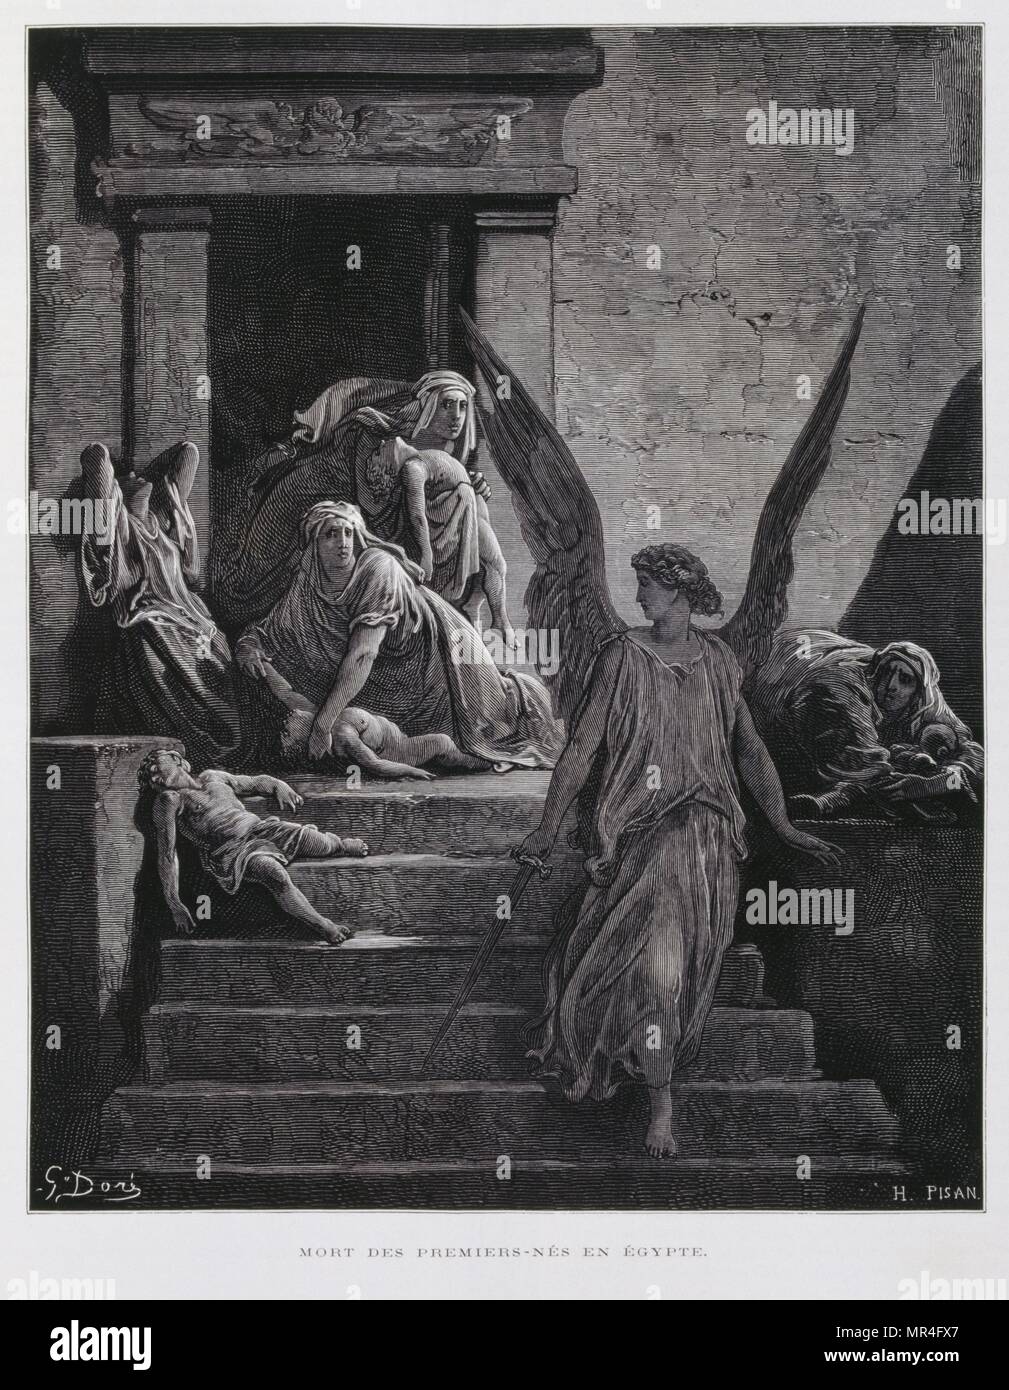 The Angel of death heralds the death of the First born children in Egypt, one of the plagues visited upon Egypt for refusing to free the Jewish people, Illustration from the Dore Bible 1866. In 1866, the French artist and illustrator Gustave Doré (1832–1883), published a series of 241 wood engravings for a new deluxe edition of the 1843 French translation of the Vulgate Bible, popularly known as the Bible de Tours. This new edition was known as La Grande Bible de Tours and its illustrations were immensely successful. Stock Photo